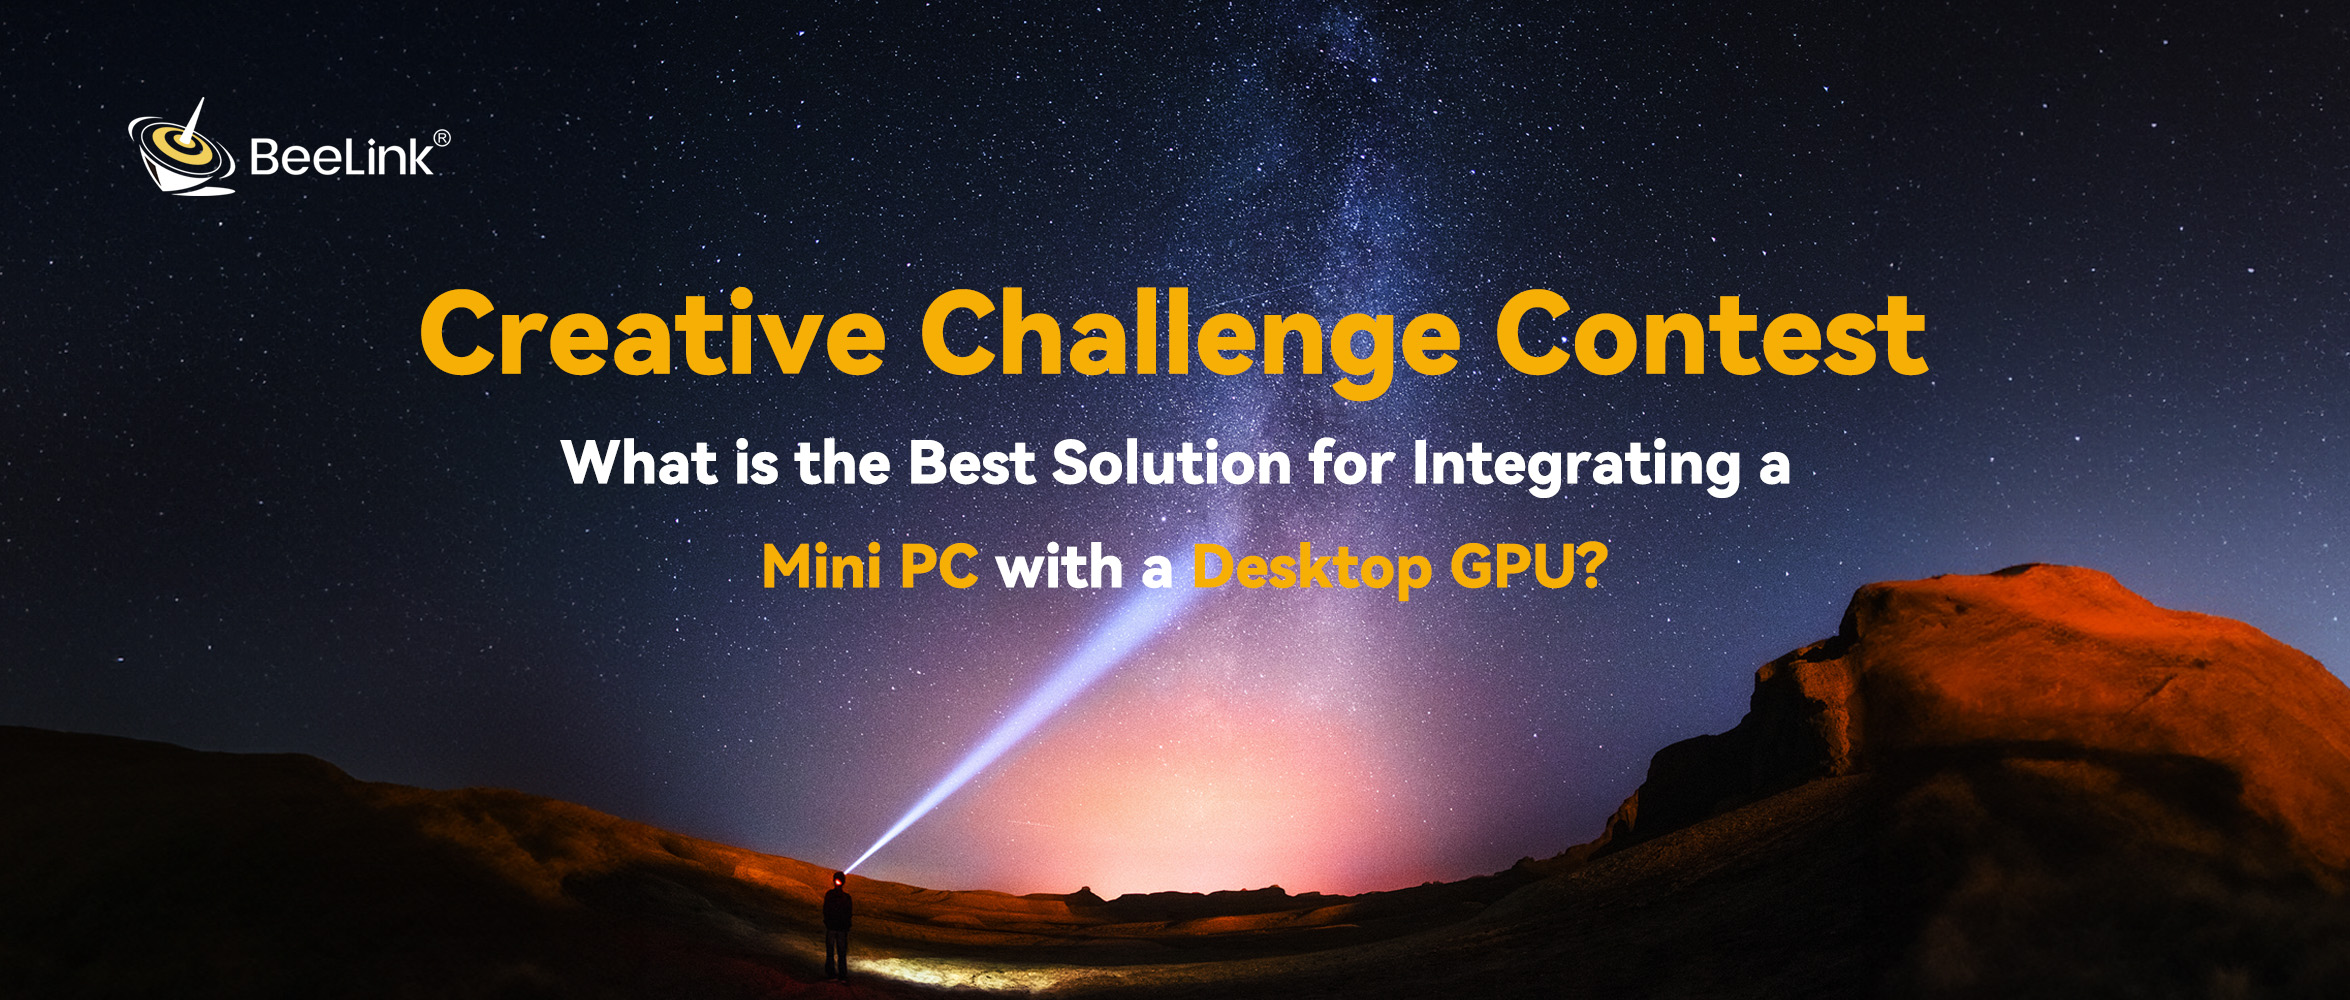 Creative Challenge Contest: What is the Best Solution for Integrating a Mini PC with a Desktop GPU?